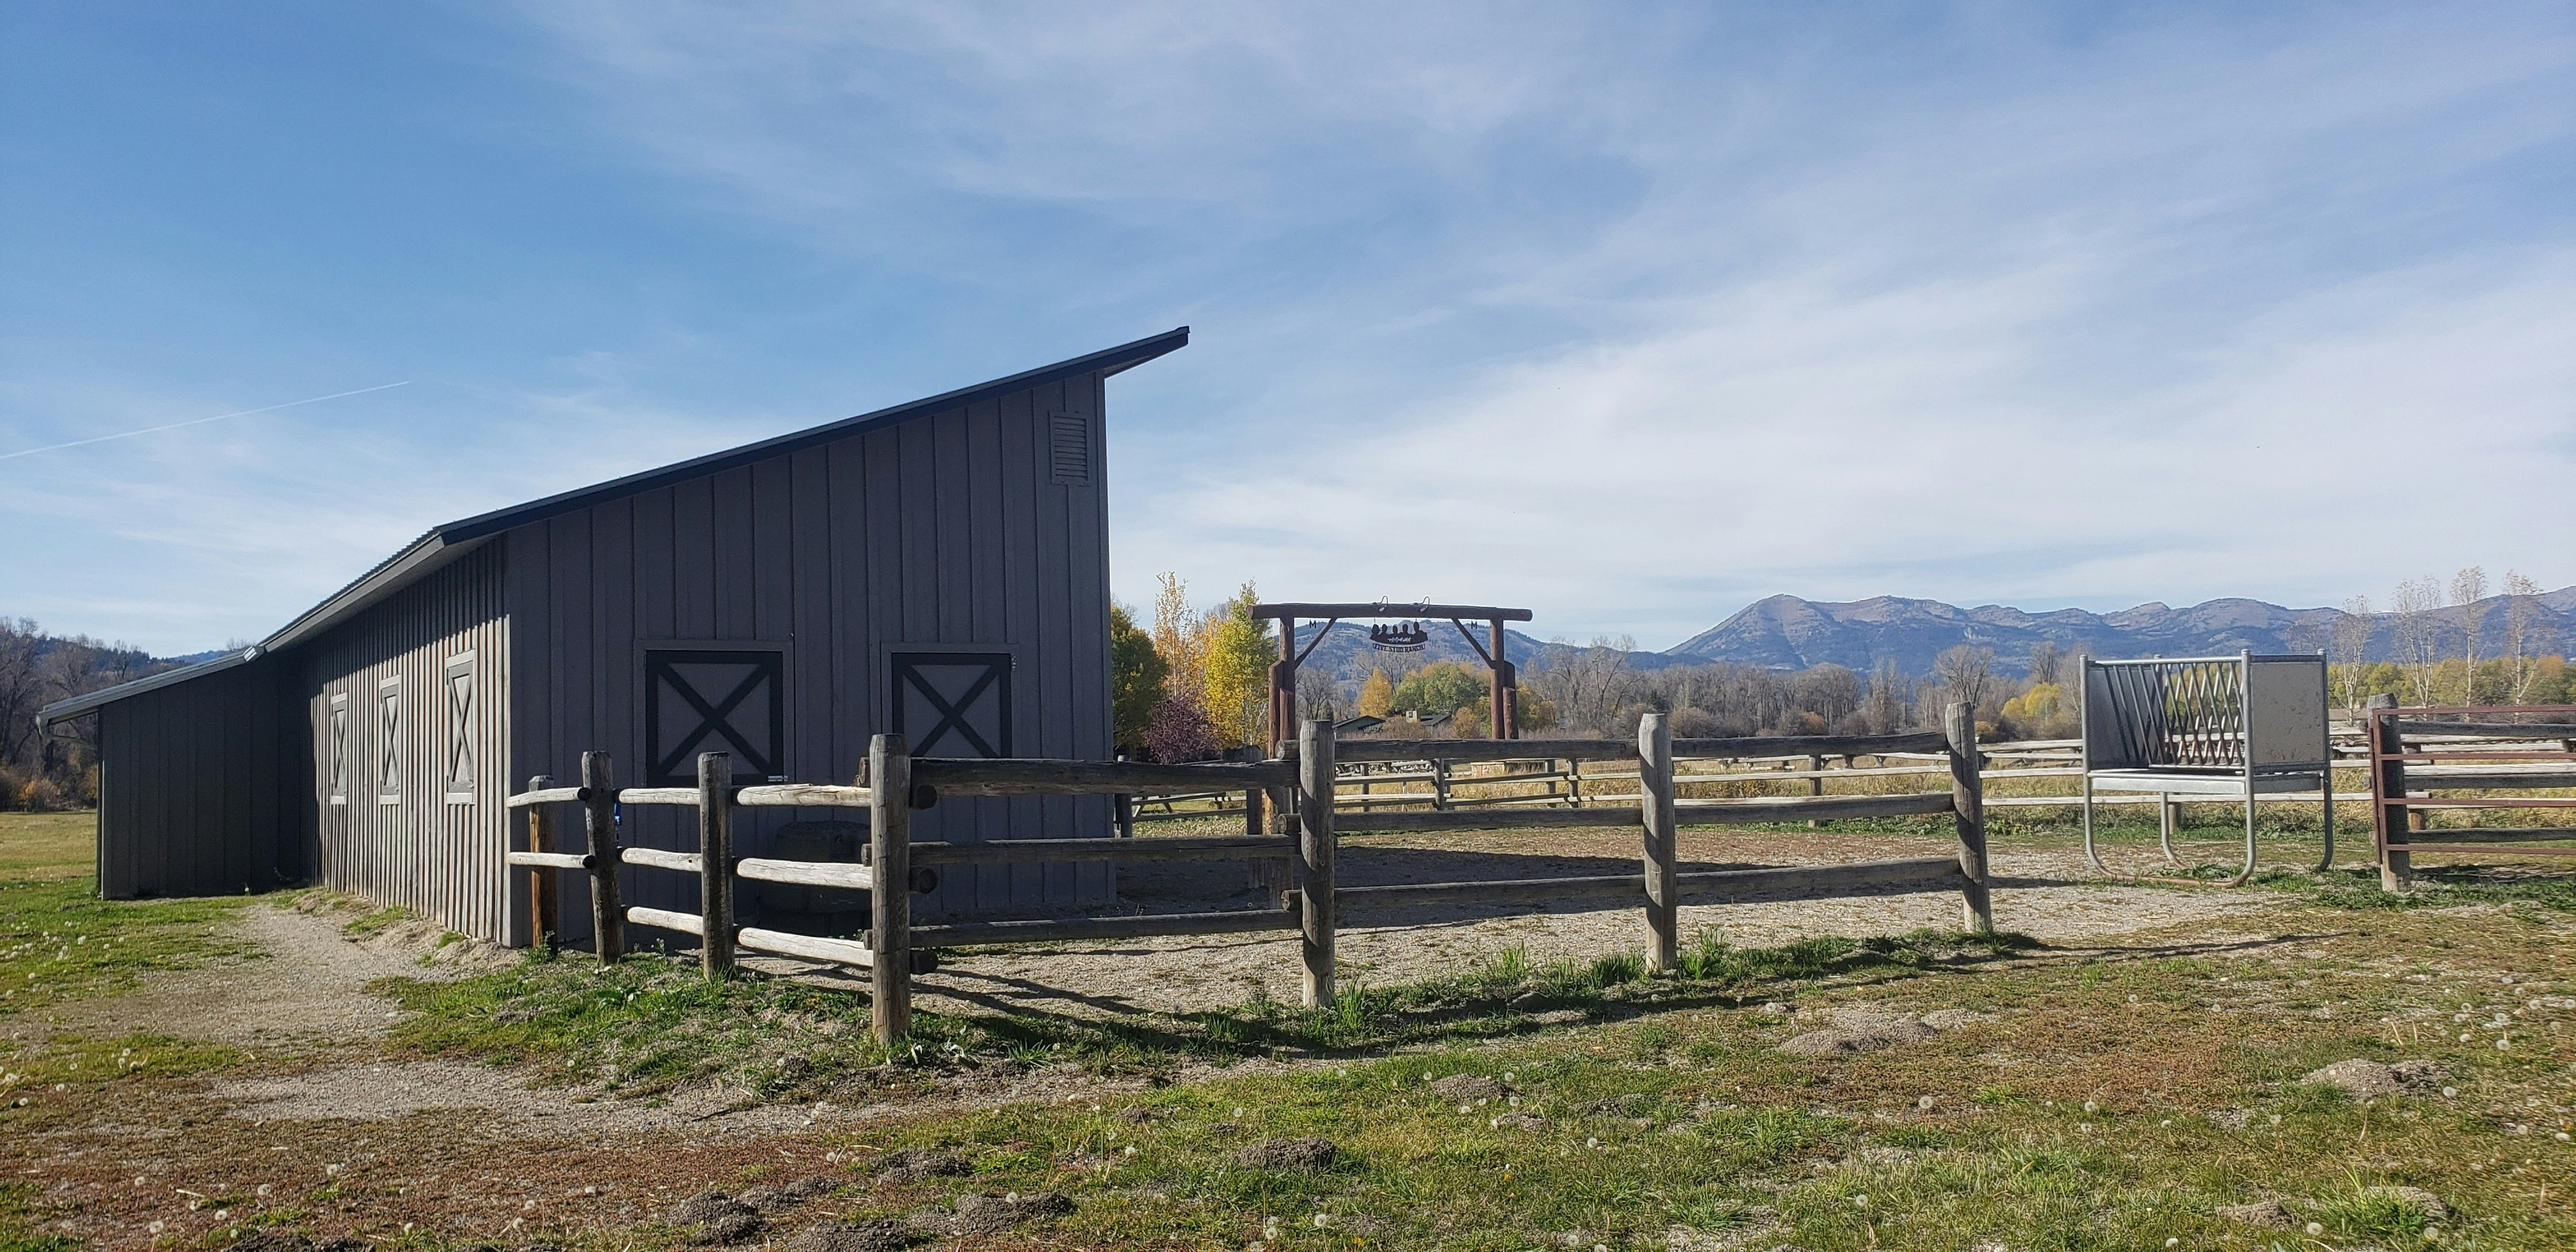 The run-in barn at the Western Star Ranch has plenty of room for tack and hay.